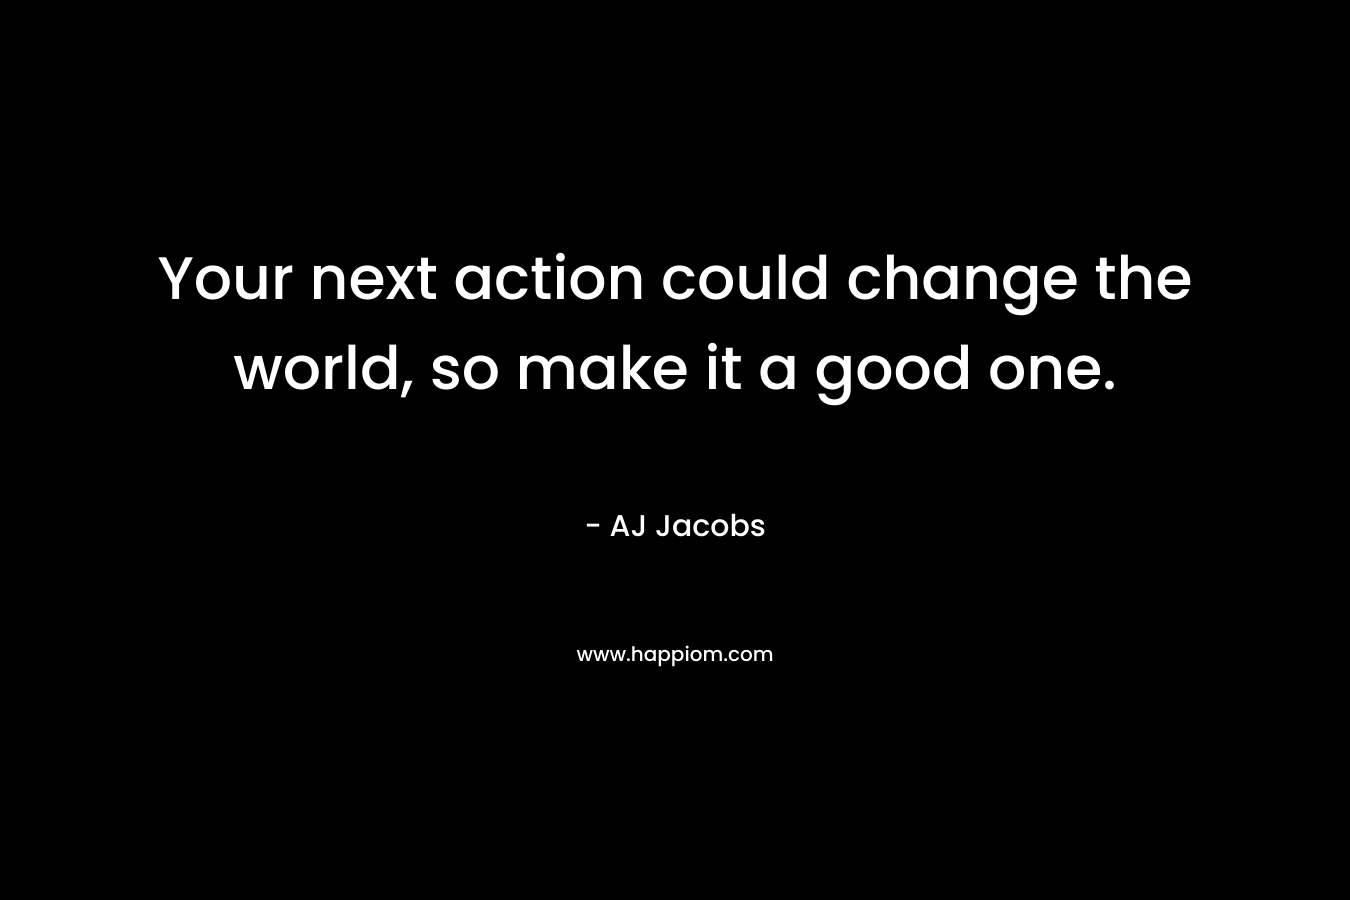 Your next action could change the world, so make it a good one.